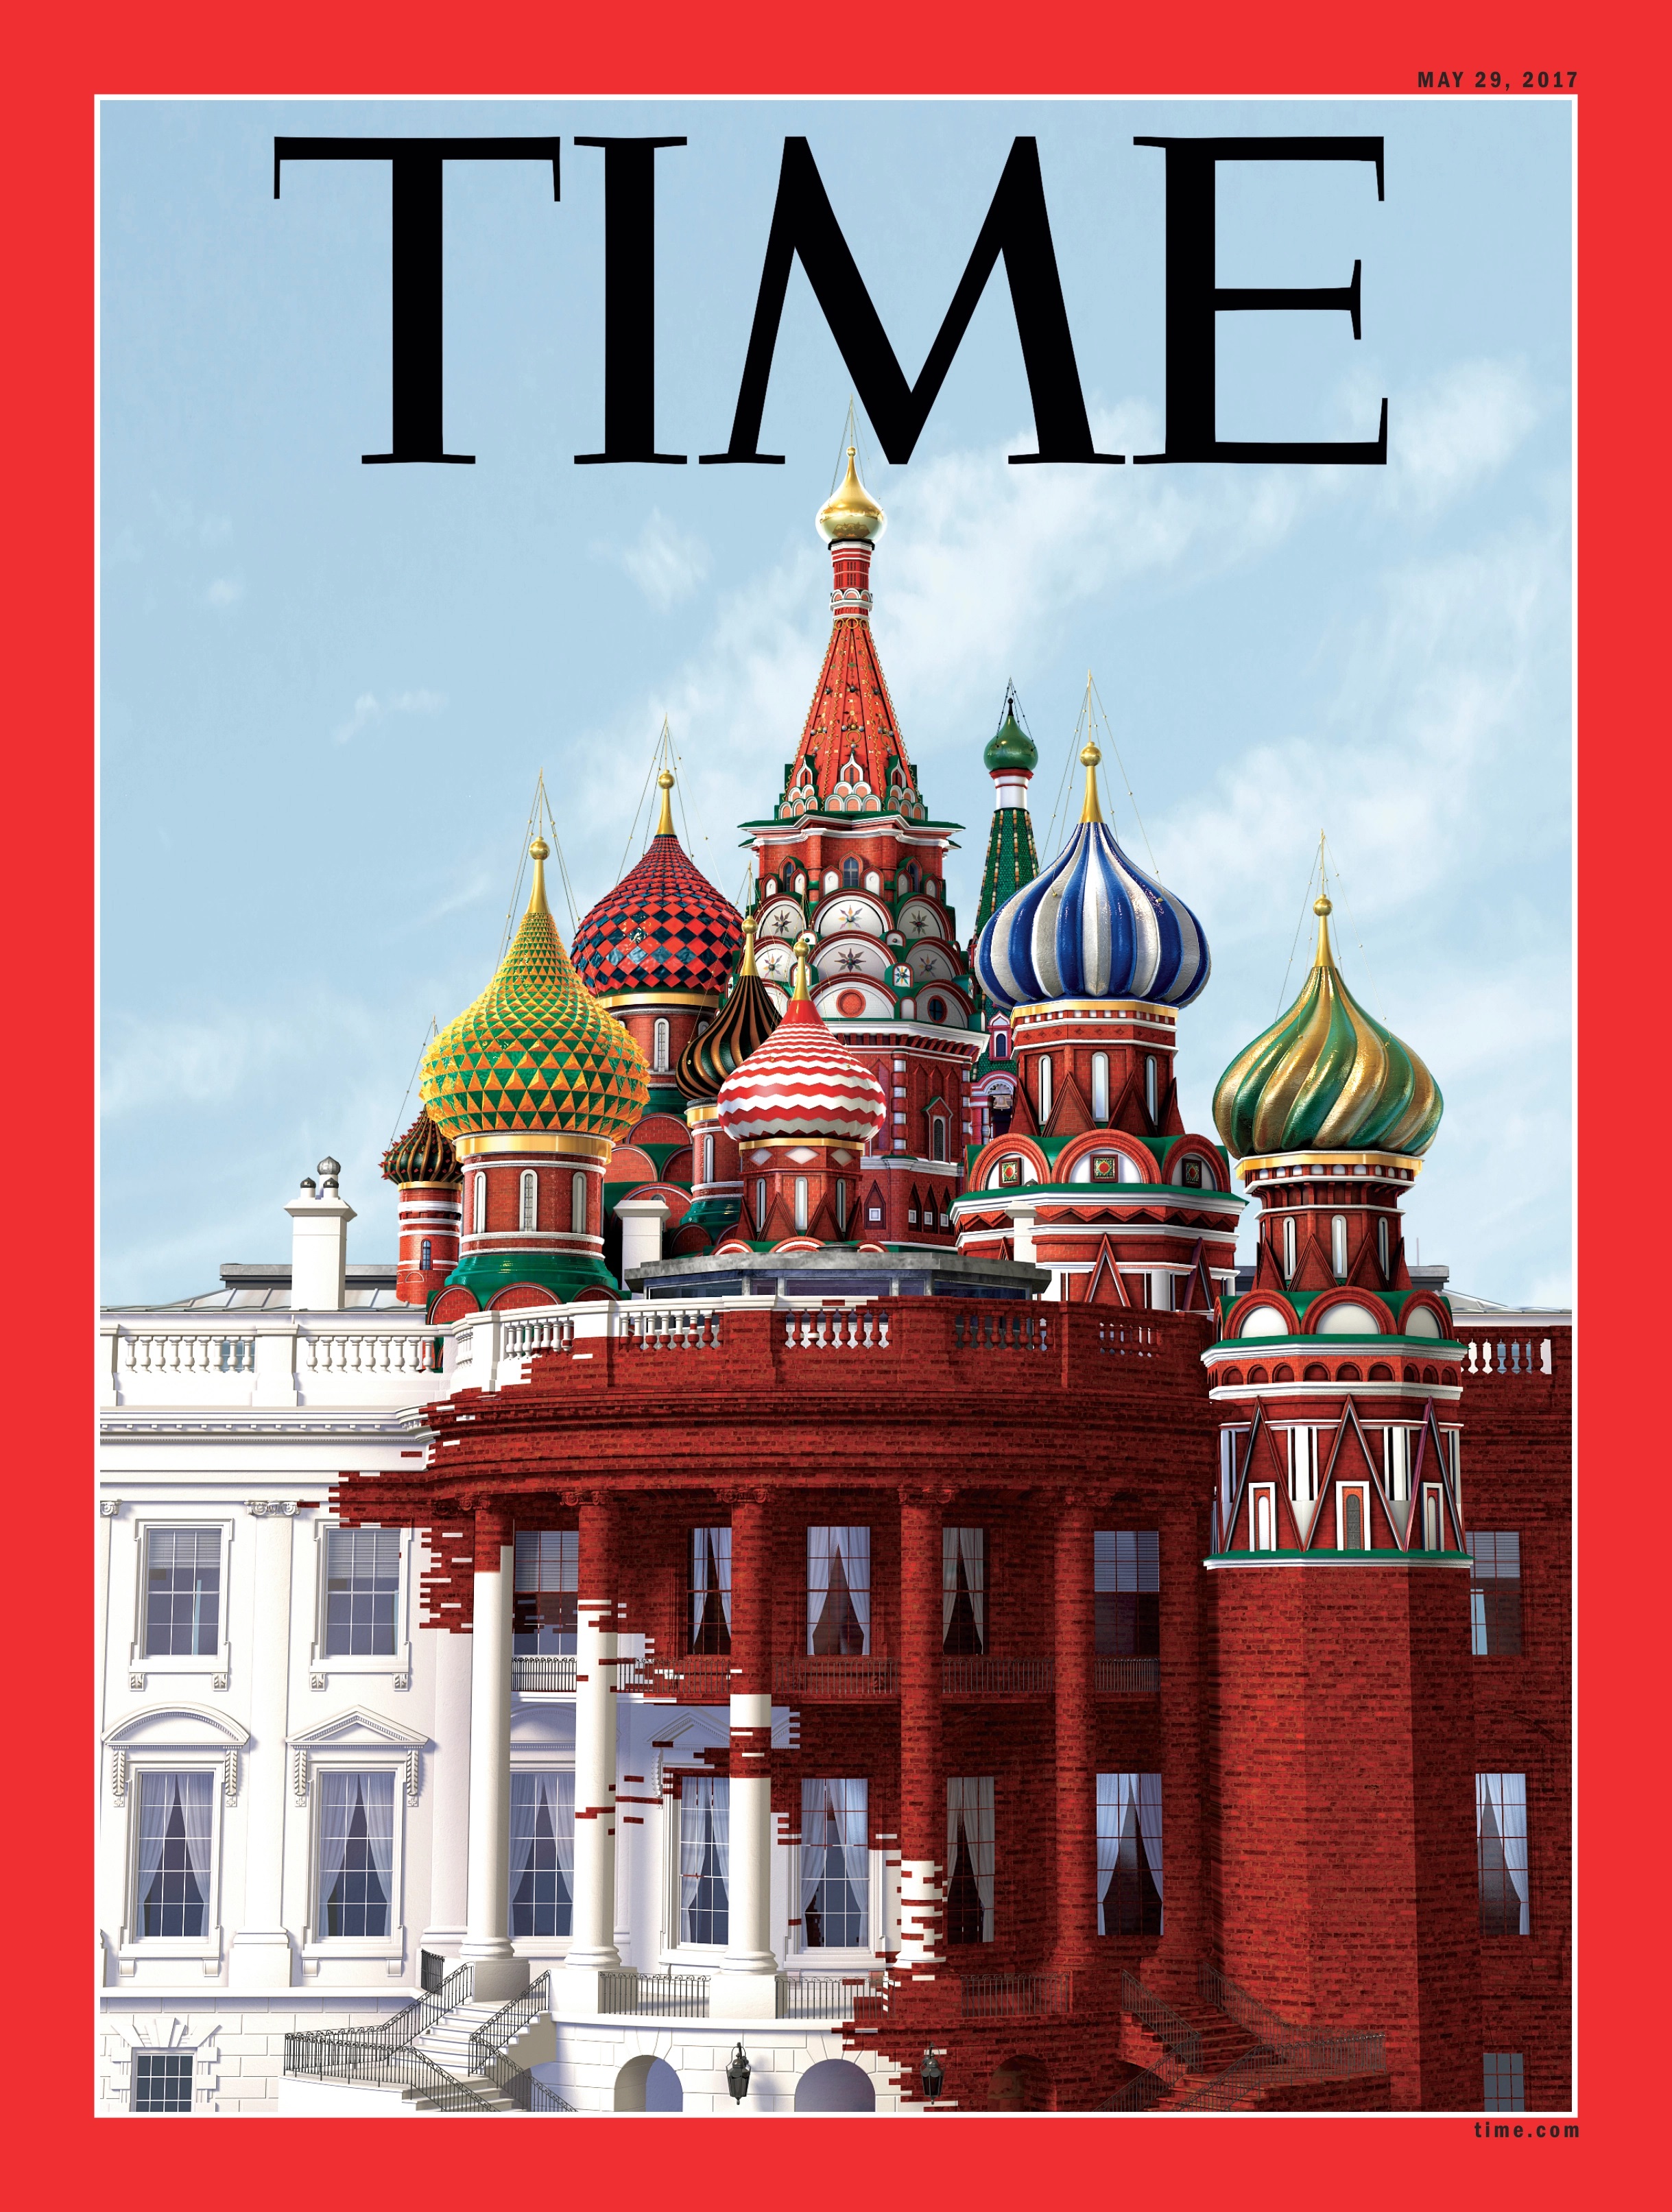 TIME - “White House, Red Square,” May 29, 2017